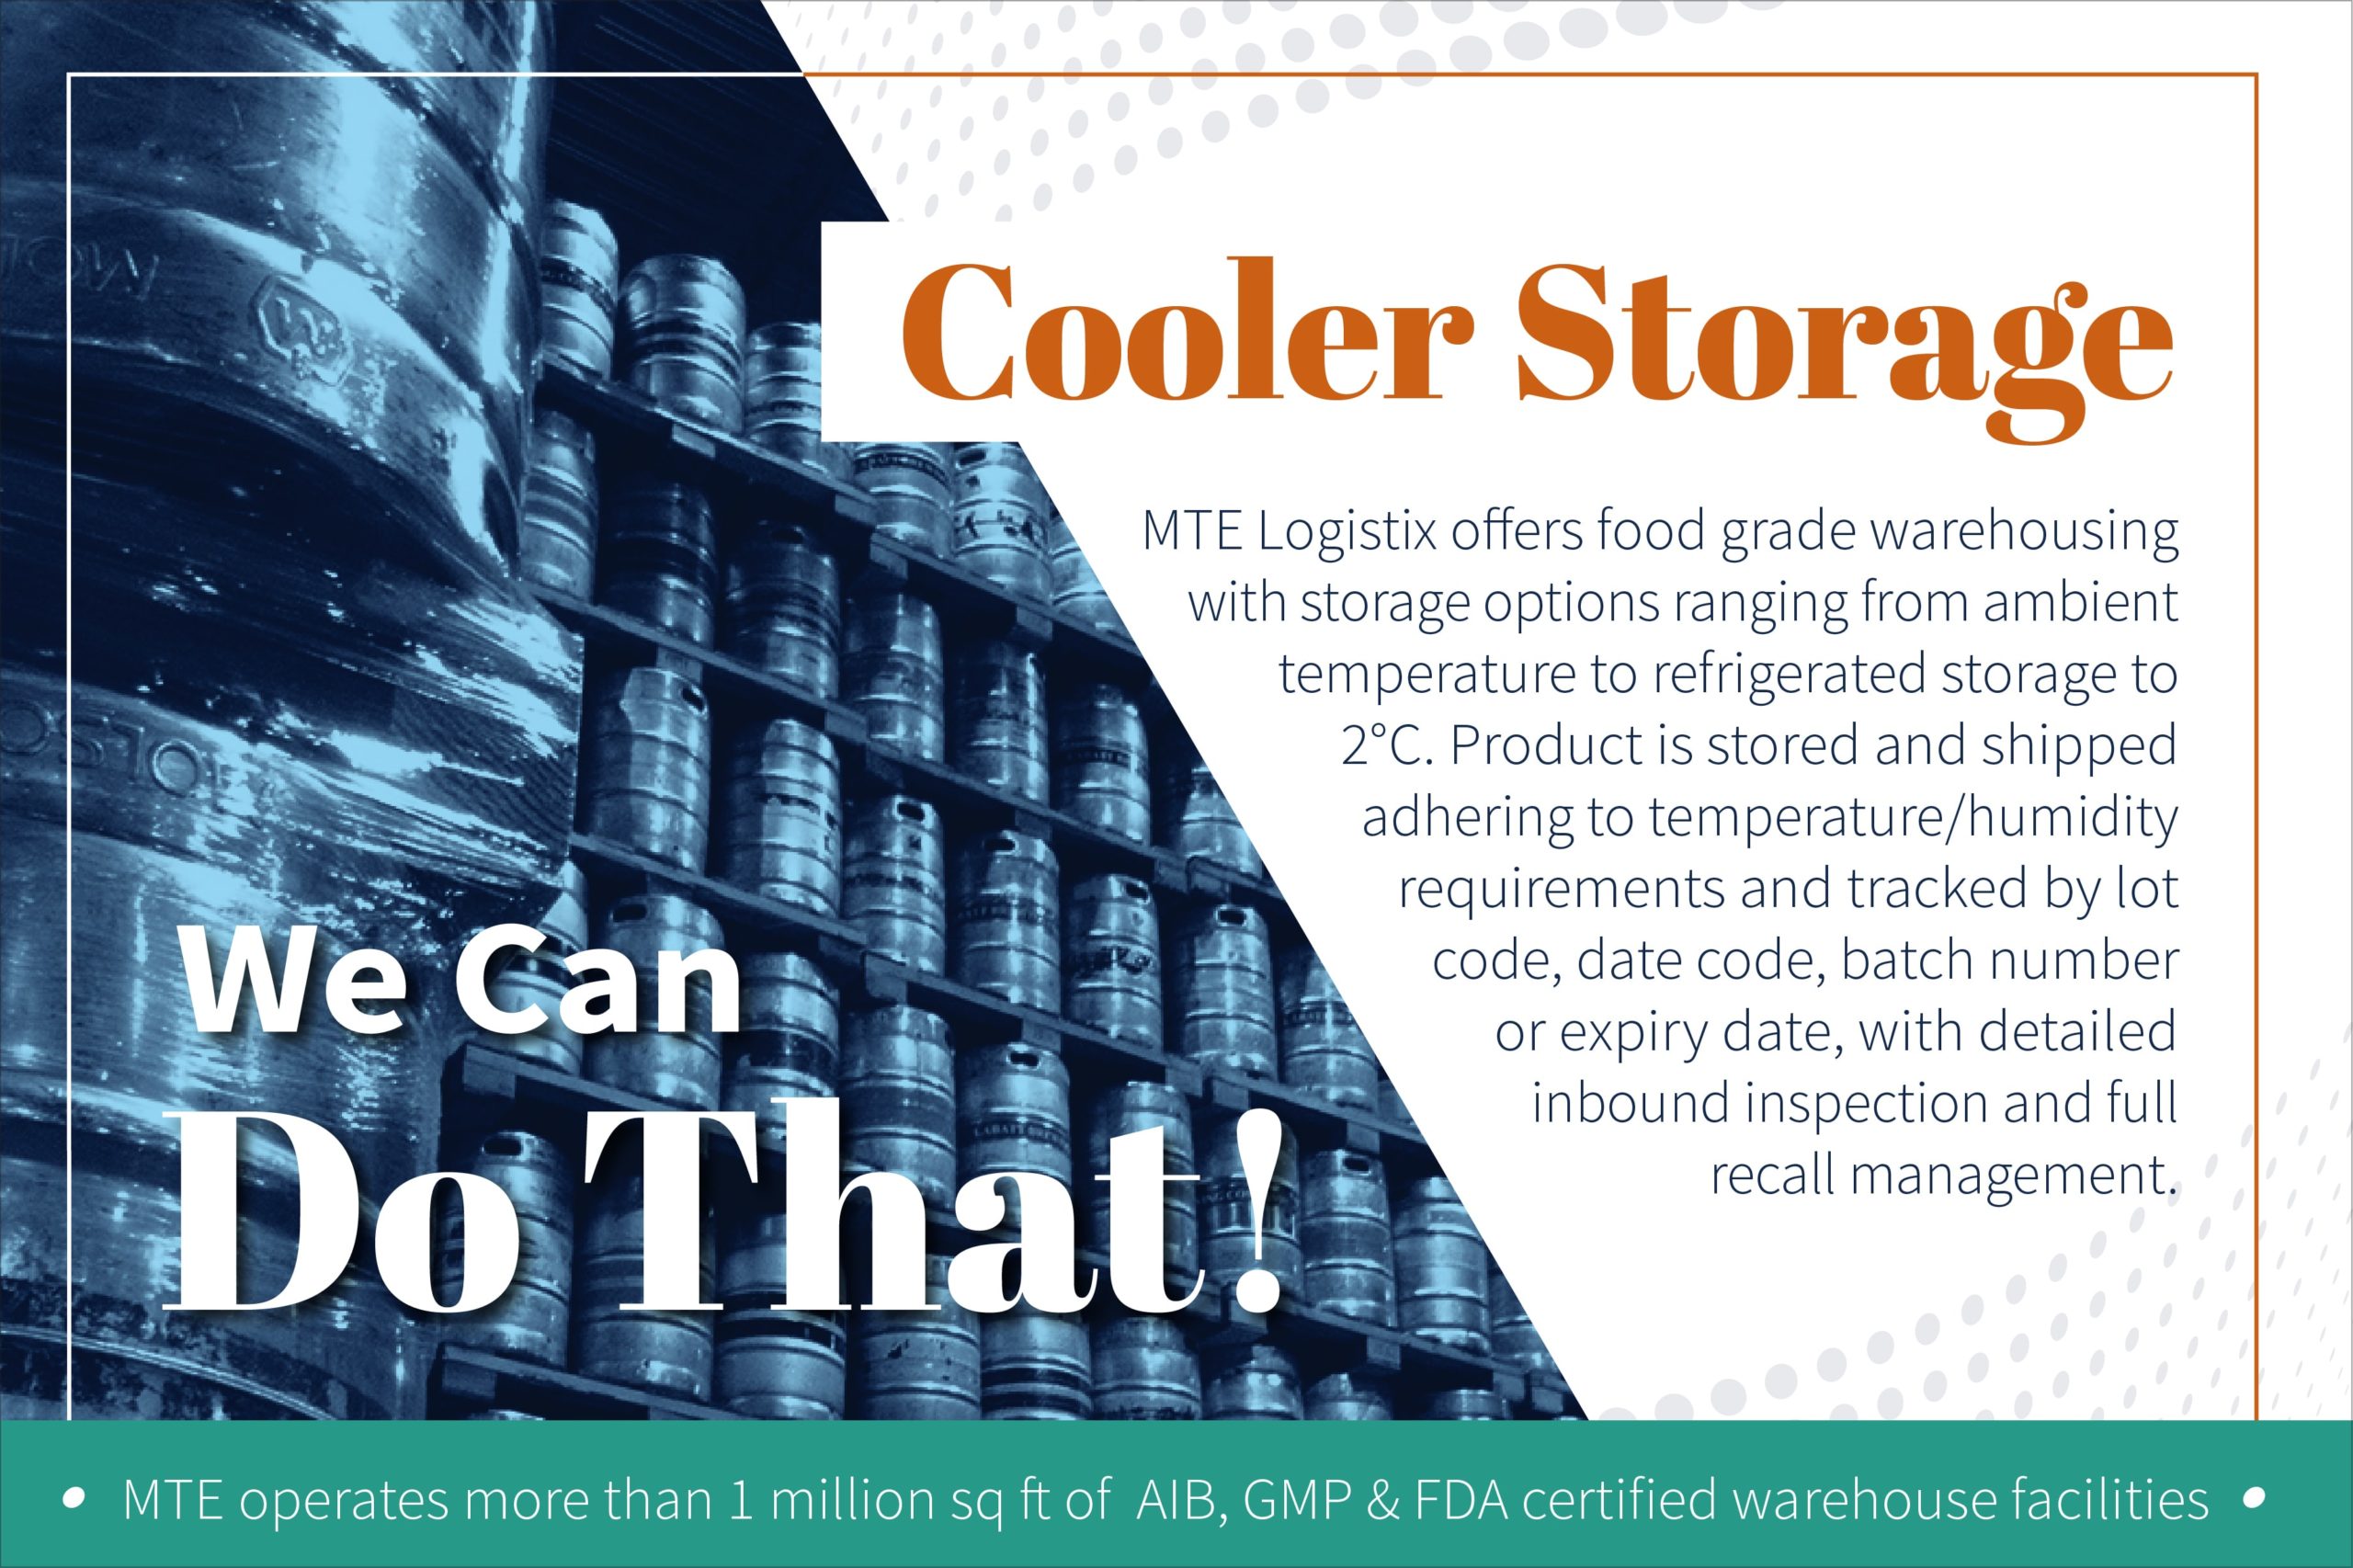 Cooler Storage - We Can Do That!